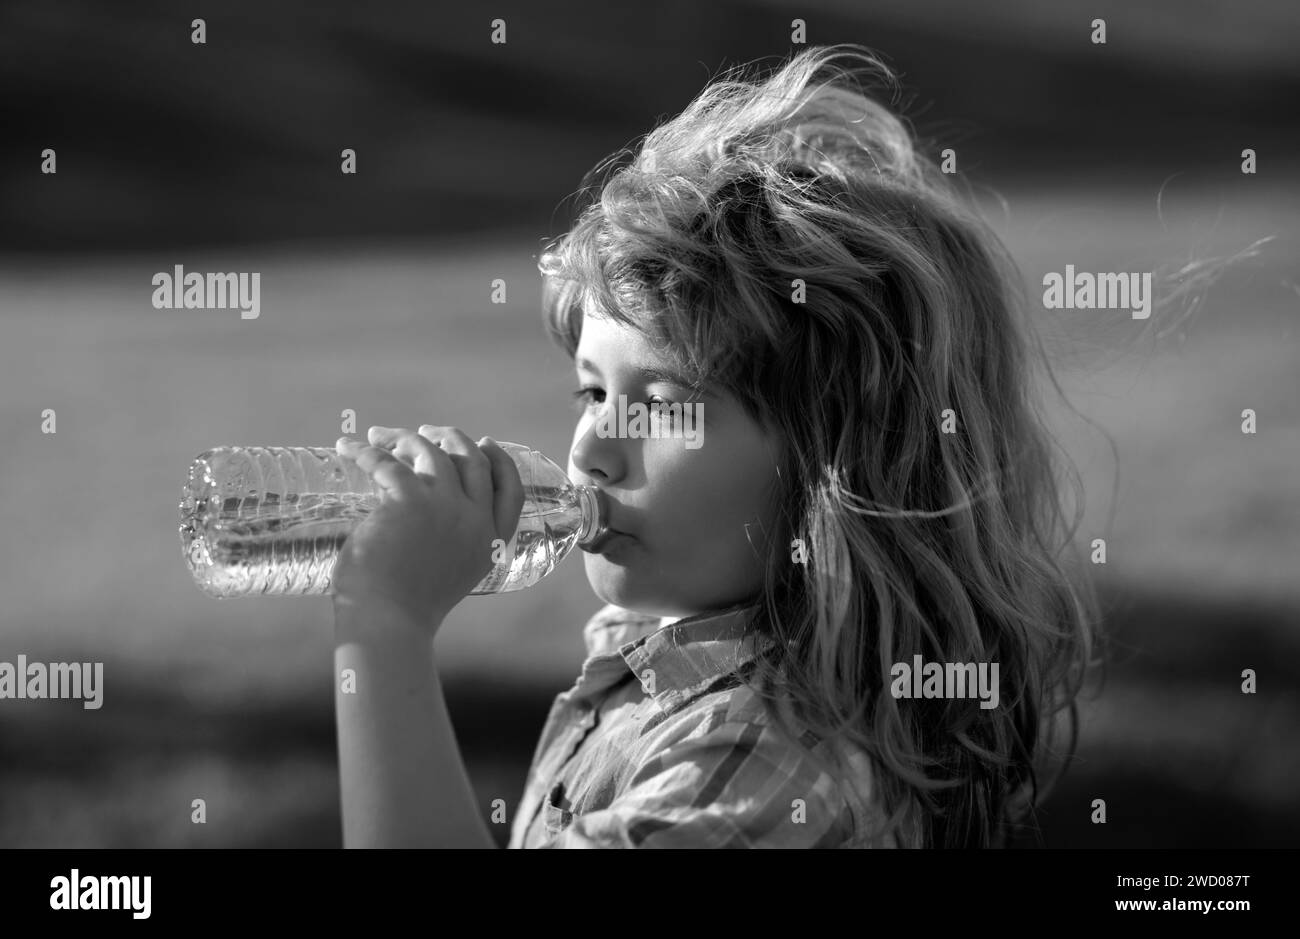 Child drinking water from pet bottle outdoor in park. Kid drinking. Boy drinking water in the park, holding plastic bottle. Thirsty child. Stock Photo